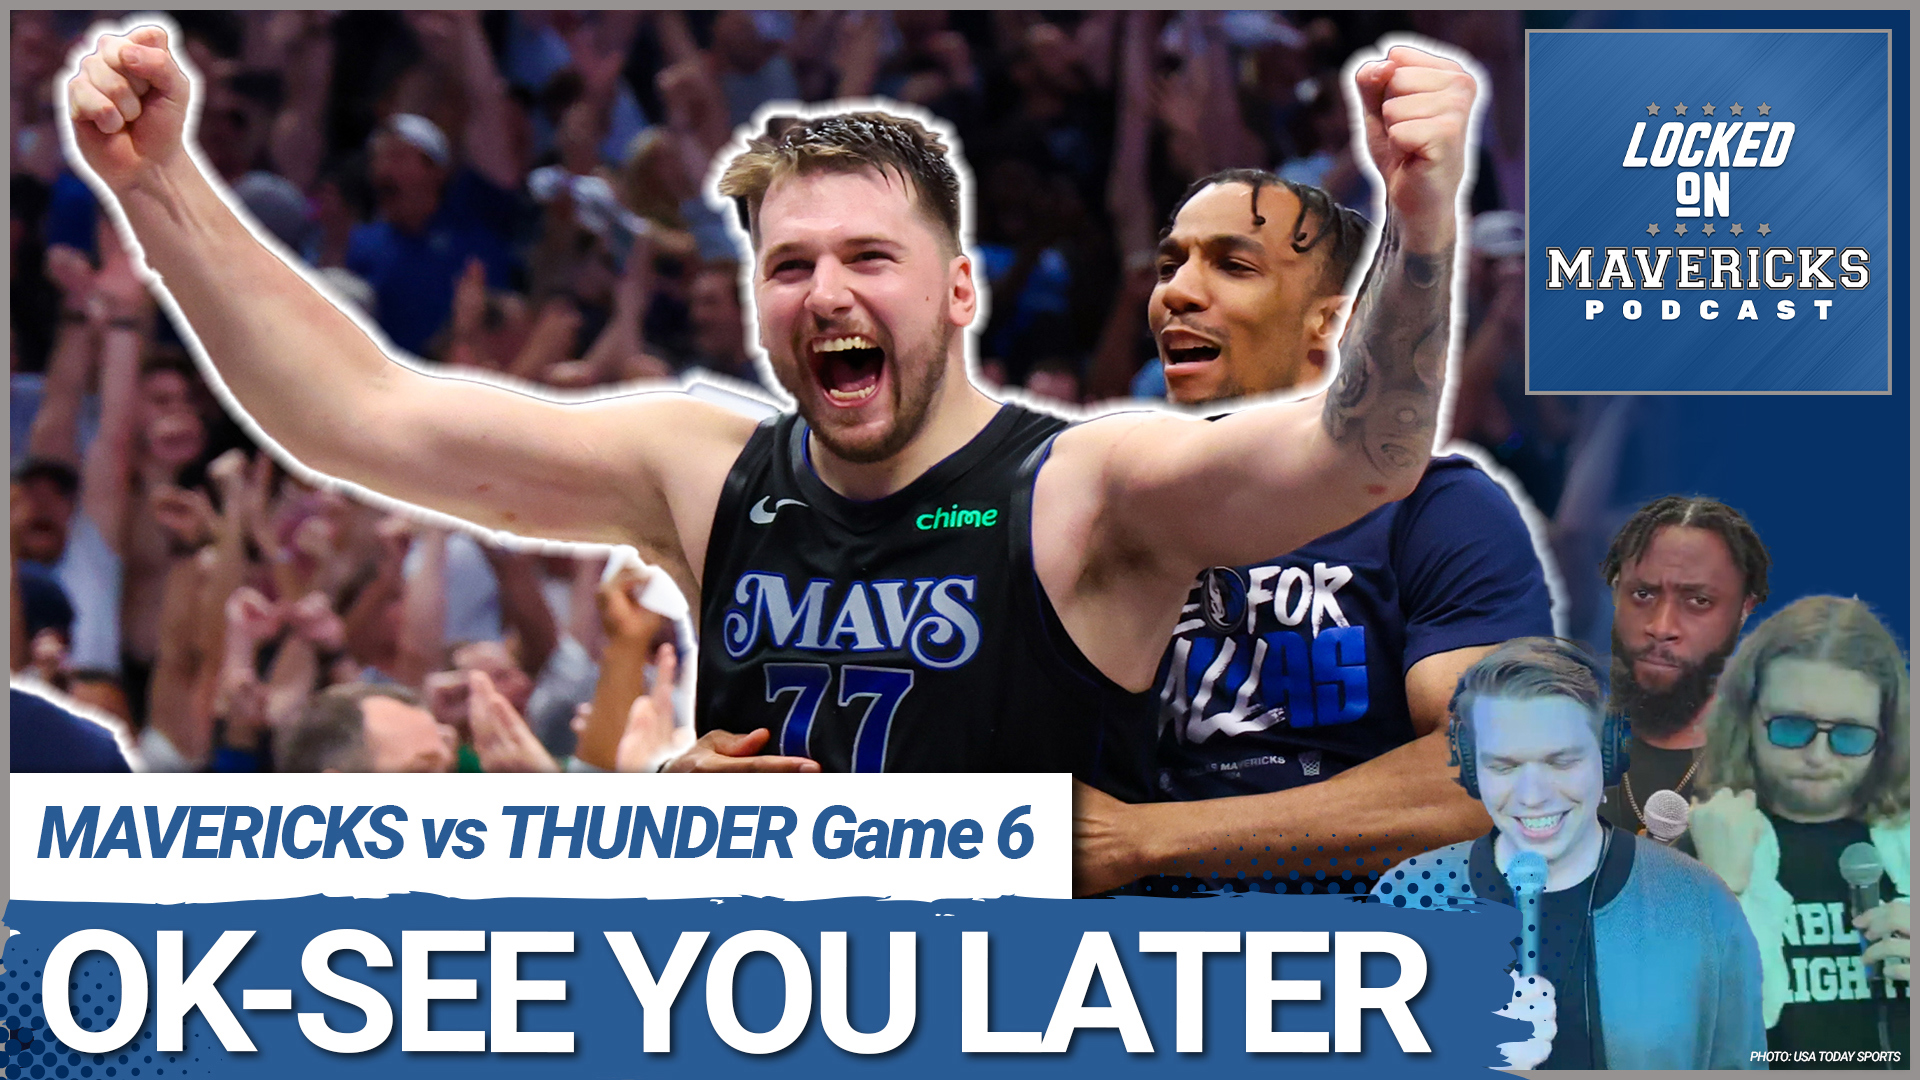 Nick Angstadt Is joined by Slightly Biased & Reggie Adetula to breakdown the Dallas Mavericks Playoff series win against the OKC Thunder with Luka Doncic.